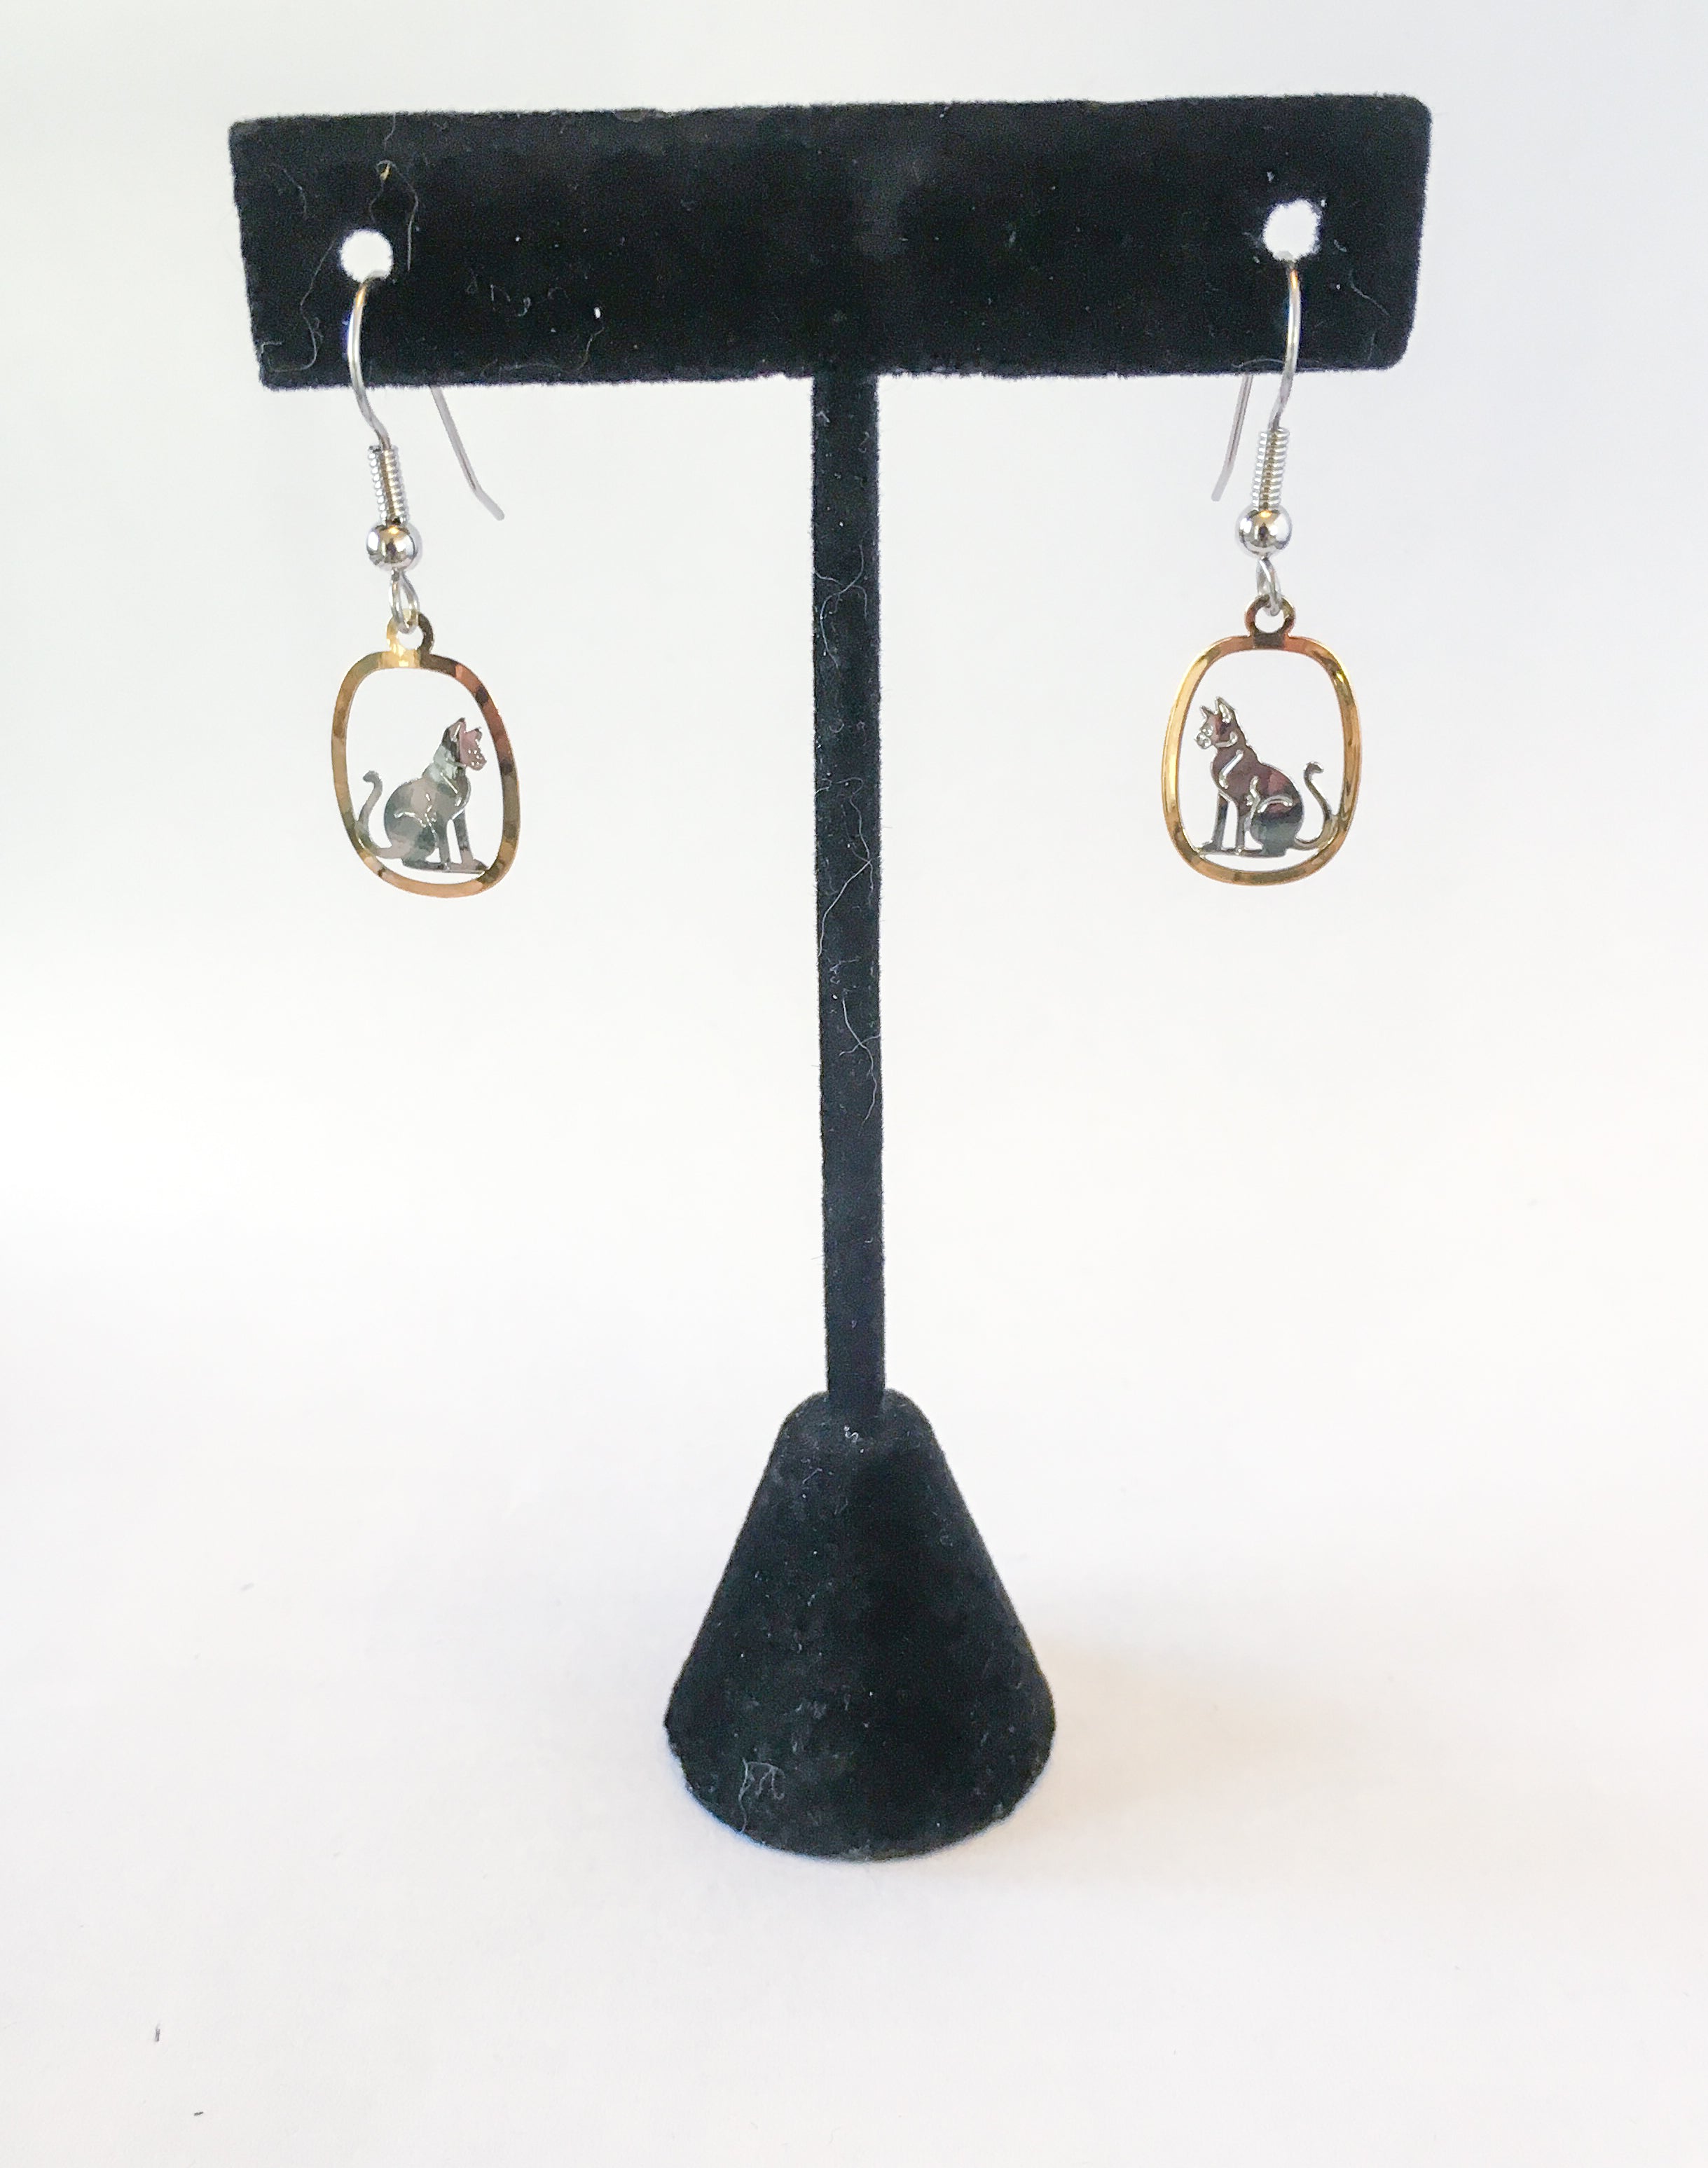 silver and gold cat earrings hang